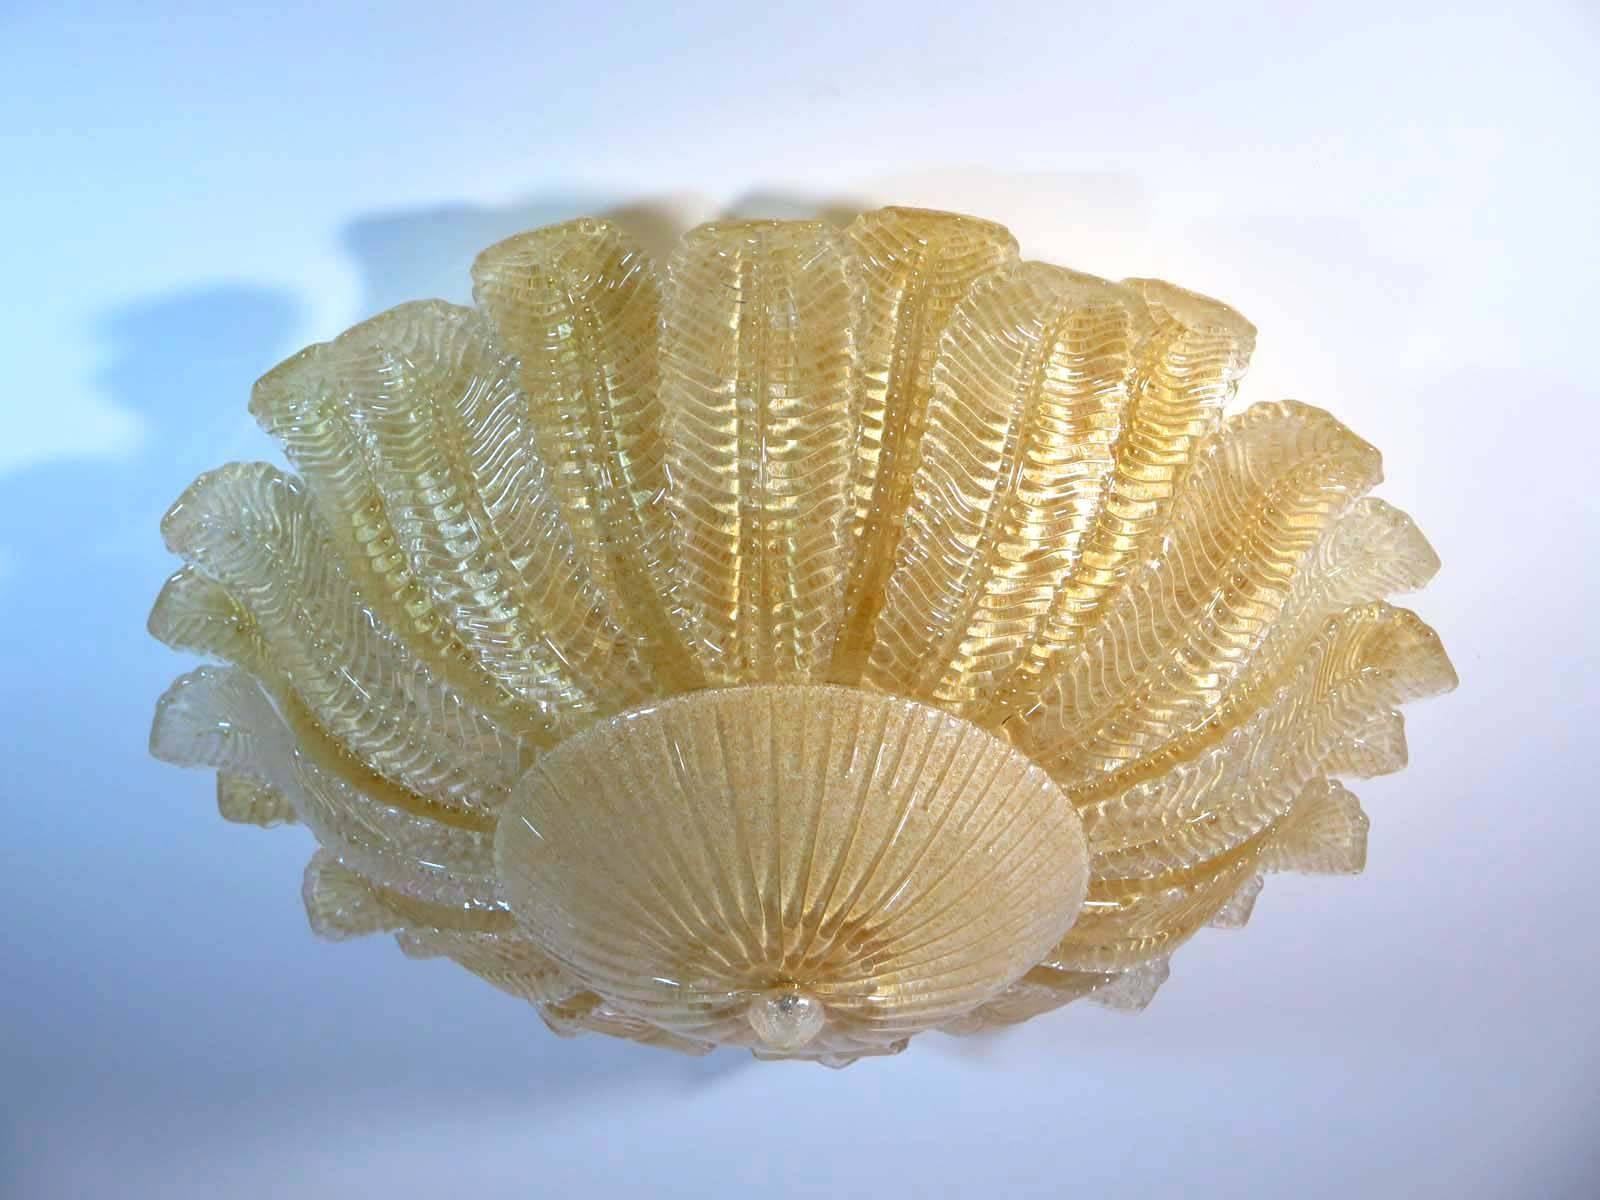 Fantastic and fabulous pair of Barovier and Toso style Murano Italy art glass ceiling lights. The rare lamp is made of 24 mouth-blown hand-formed leaf-form golden powder glass panels plus a huge glass as a bottom. This beauty has the look of a